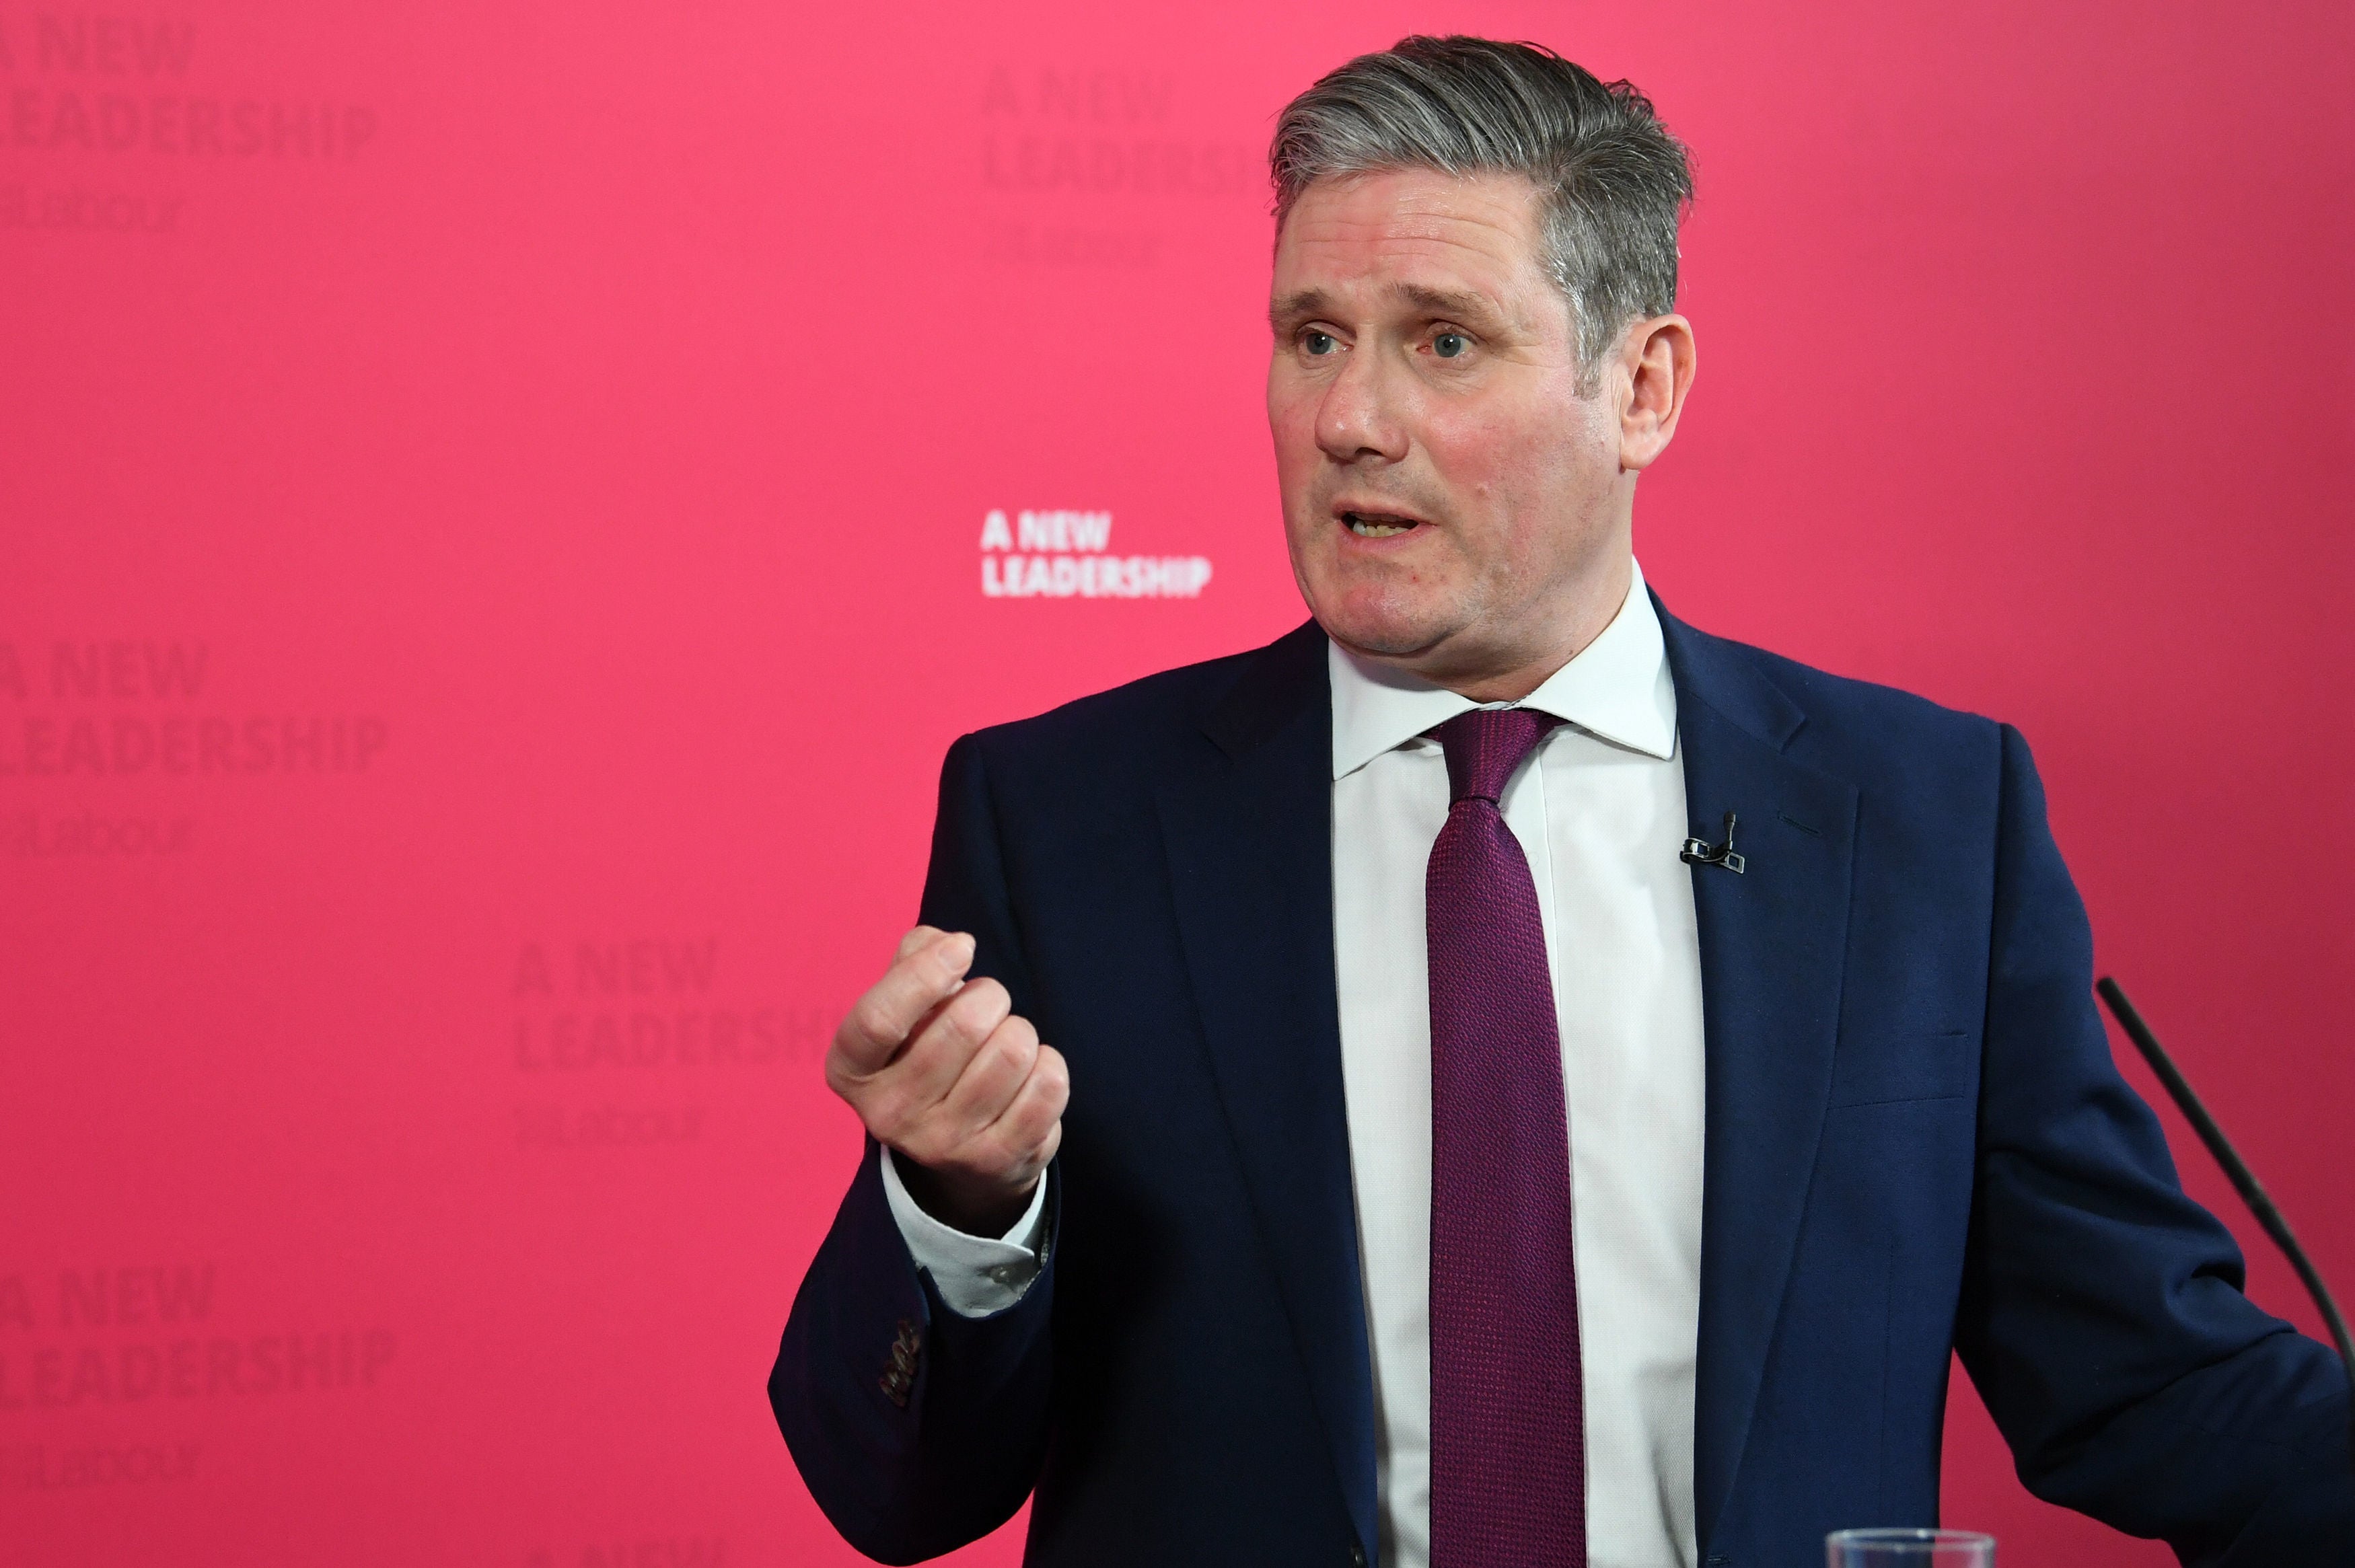 Keir Starmer has faced a number of questions about Brexit